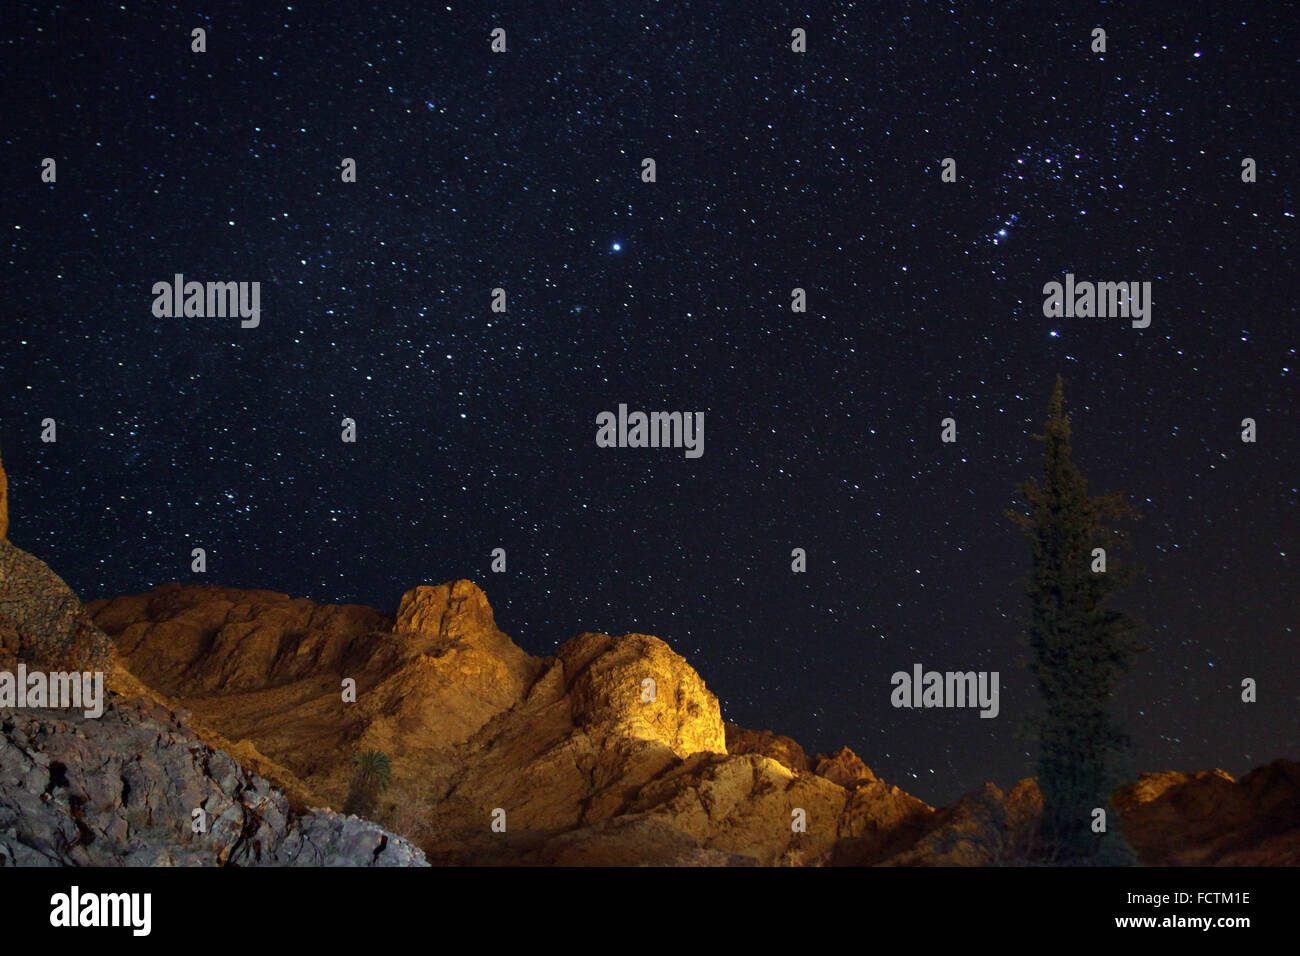 (160125) -- SINA, Jan. 25, 2016 (Xinhua) -- Stars are seen in the sky over the desert south of Sina, Egypt on Jan. 15, 2016. (Xinhua/Ahmed Gomaa) (zjy) Stock Photo